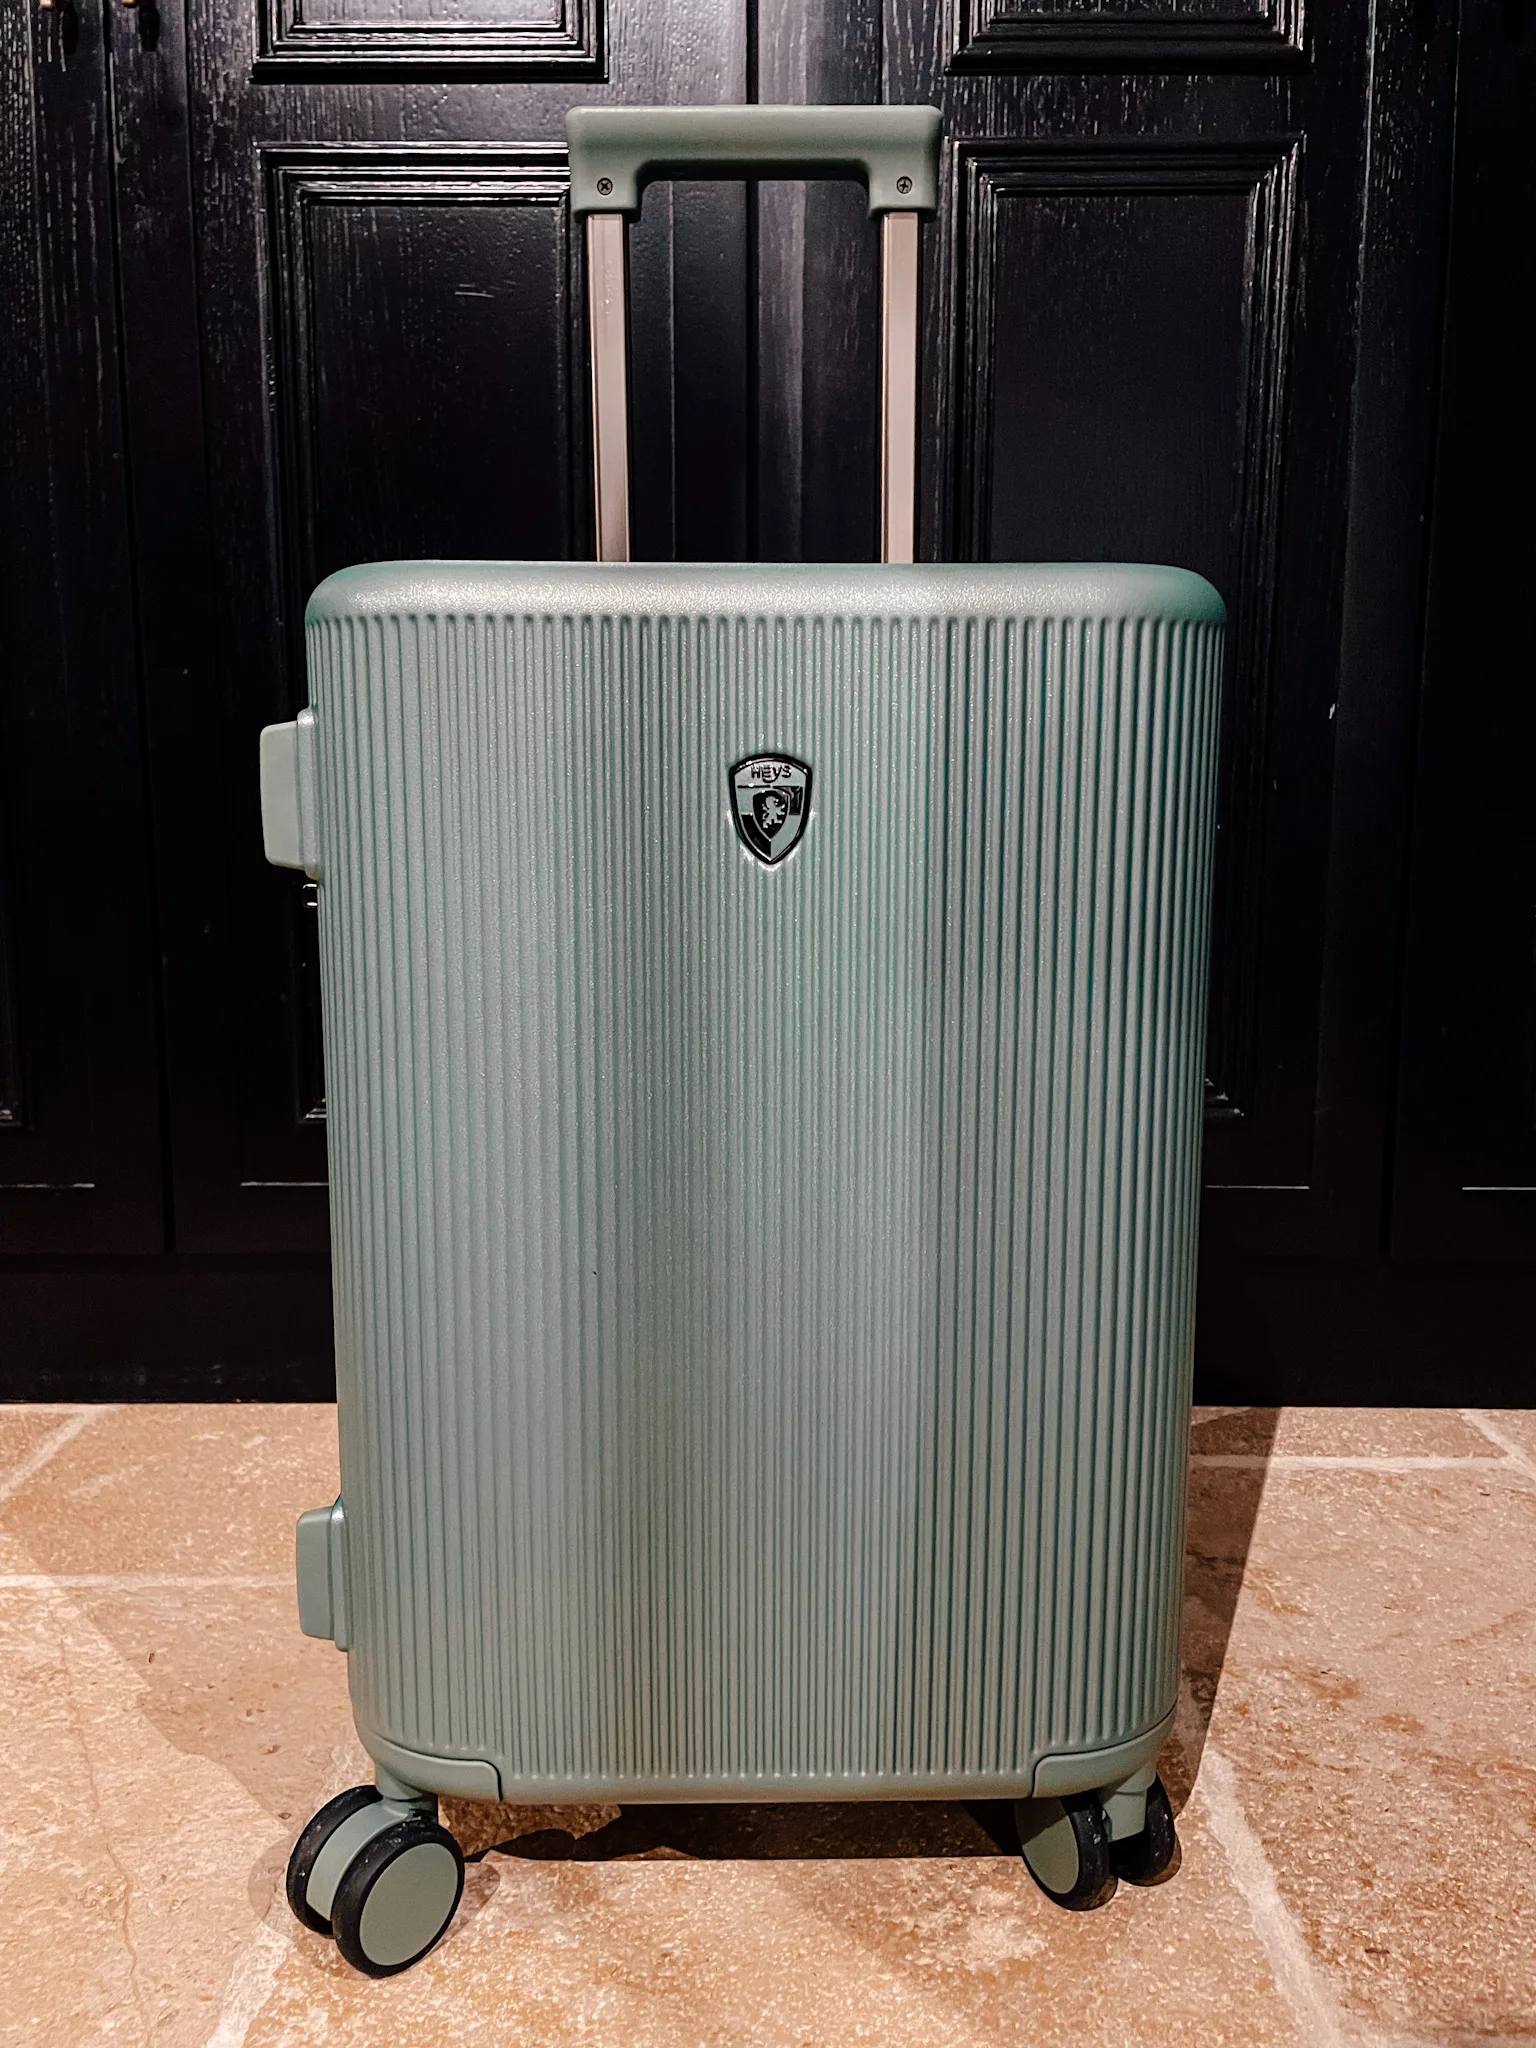 The carry-on size Heys luggage Earth Tones collection in moss.